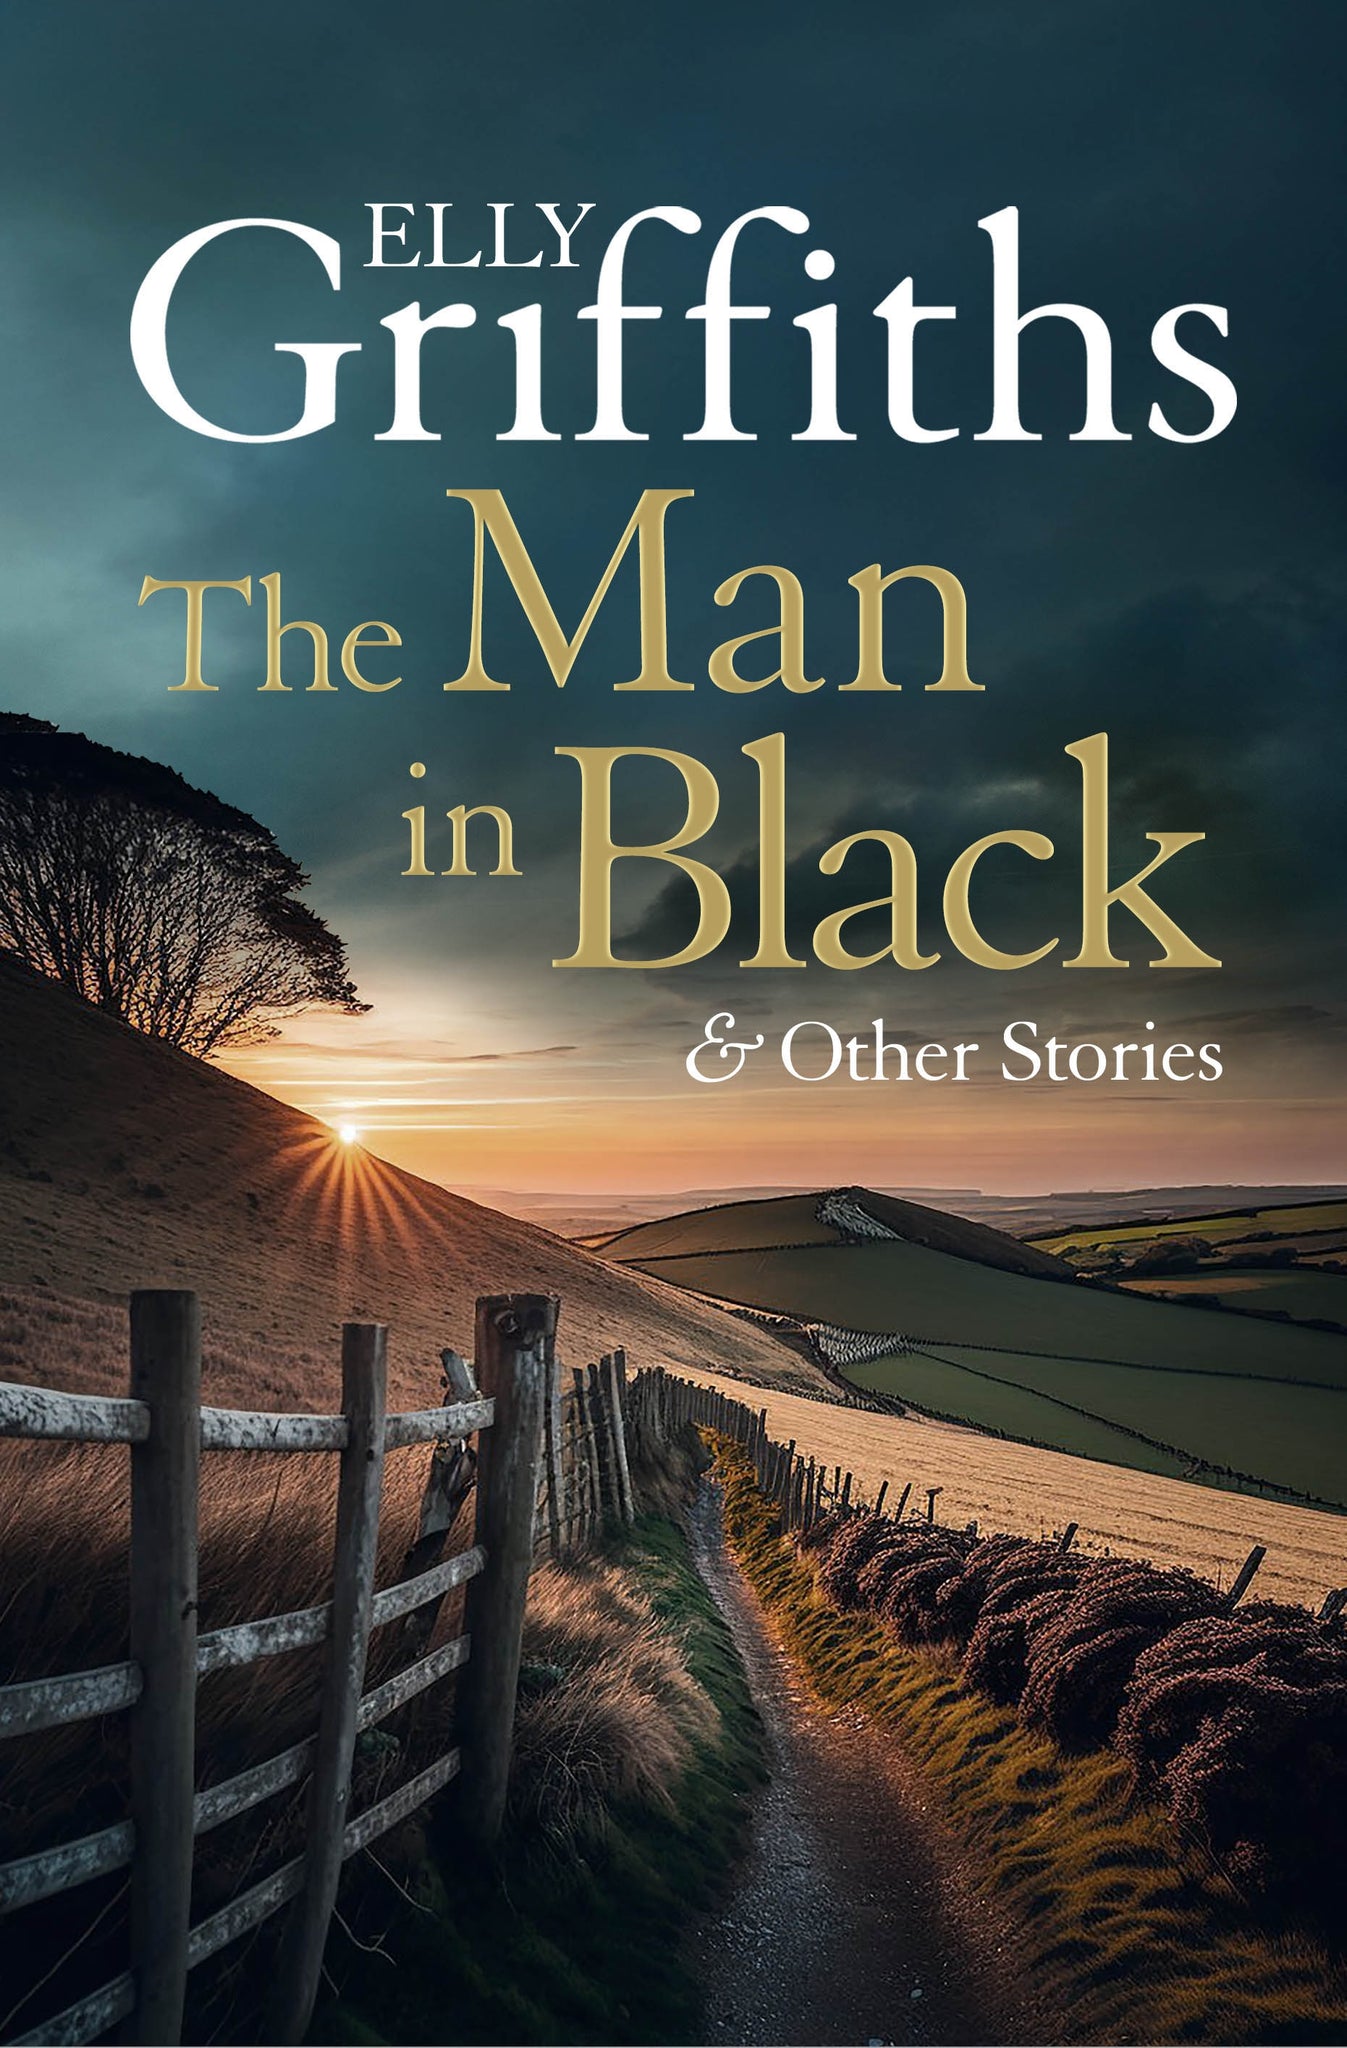 EVENT BOOK PREORDER 19/06: Elly Griffiths, The Man in Black and Other Stories (Bristol Central Library)